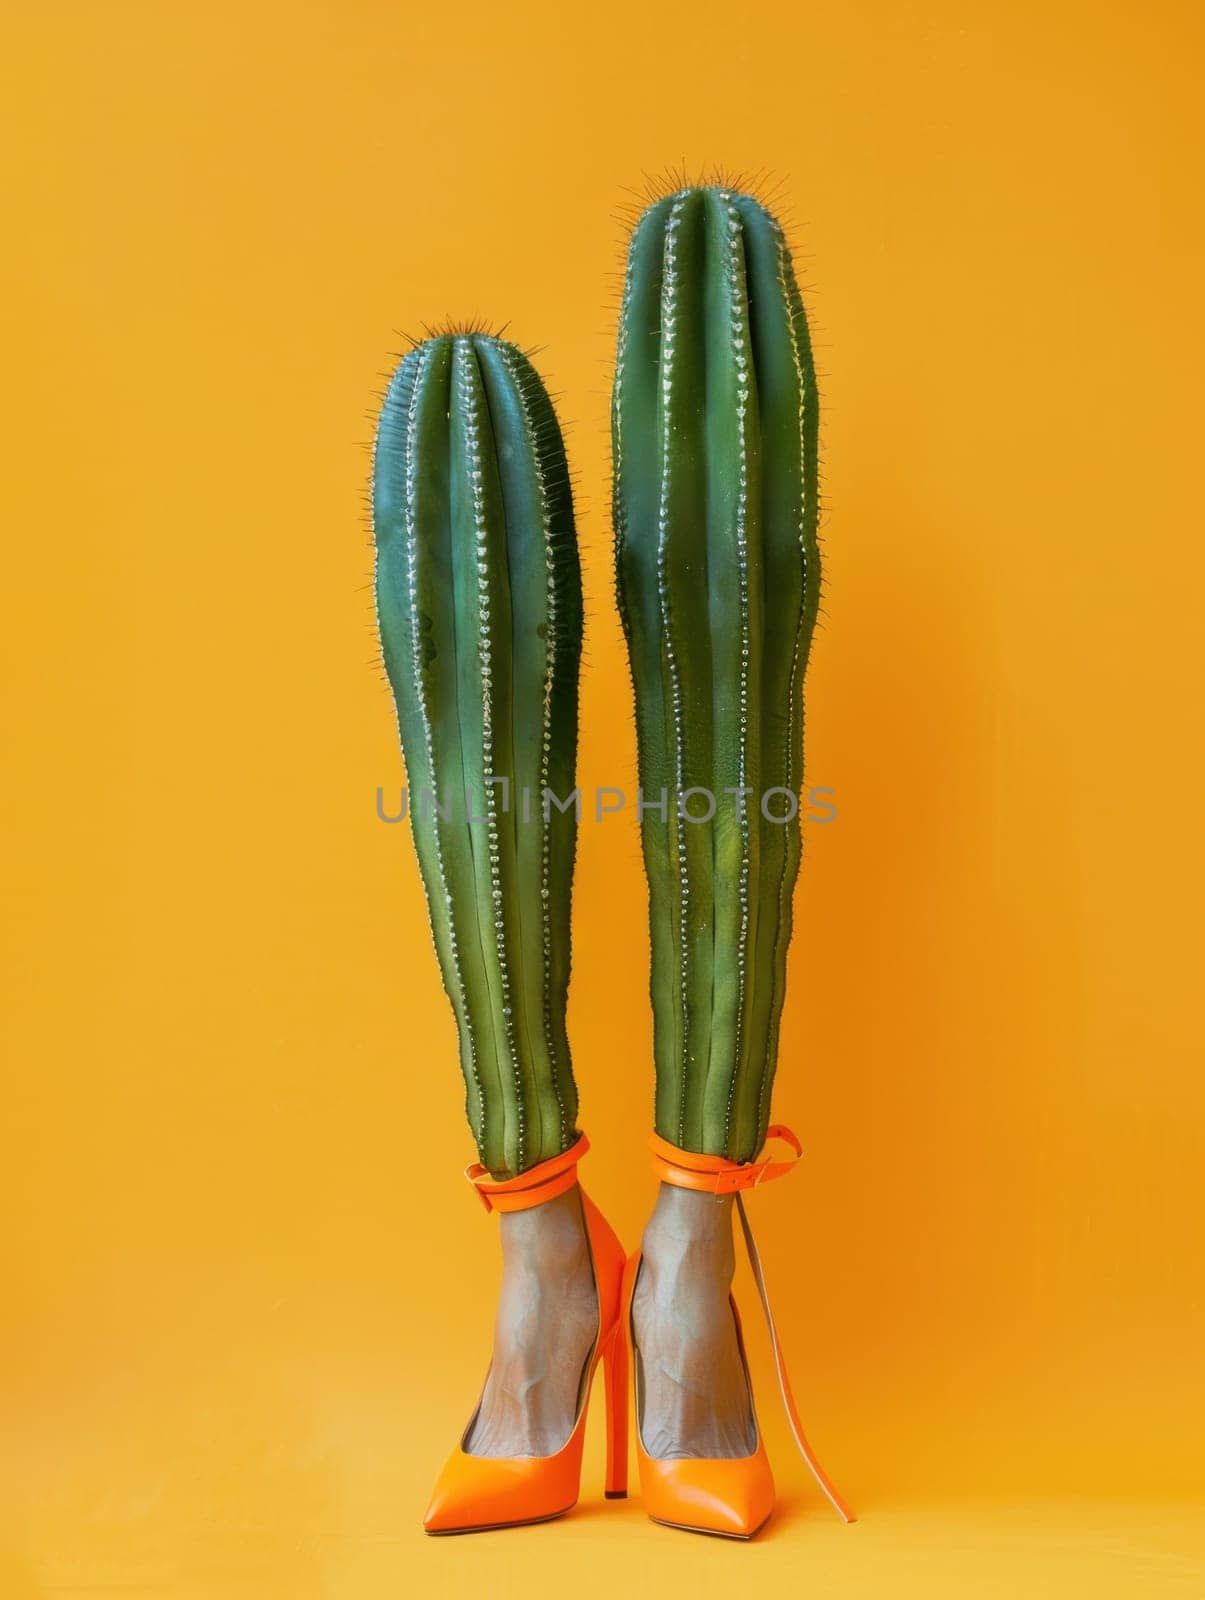 Desert chic two cactus plants wearing bright orange shoes as woman's legs enter frame